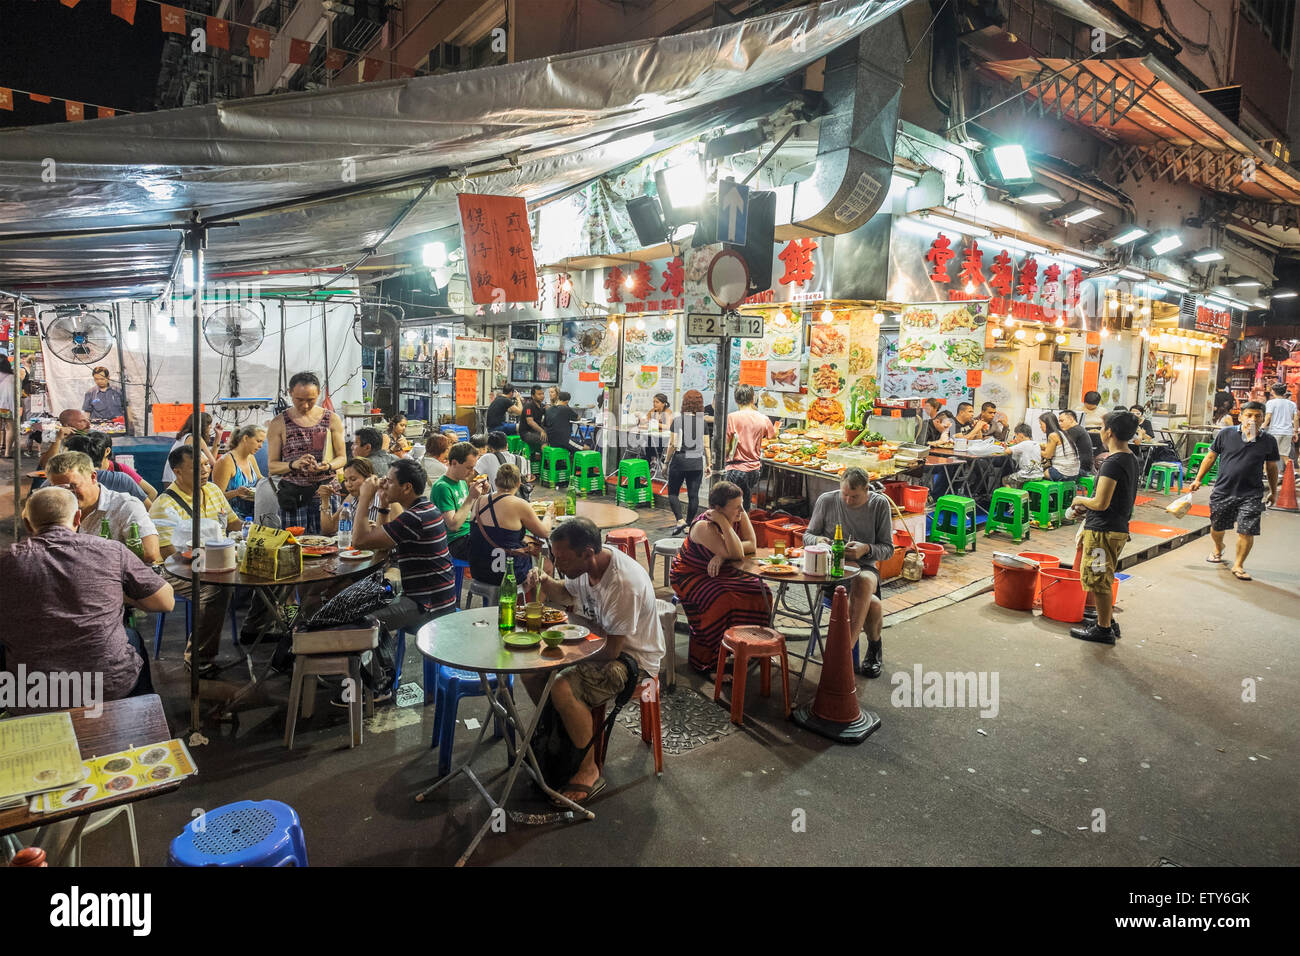 Busy seafood restaurant at temple Street night market in Kowloon Hong Kong Stock Photo